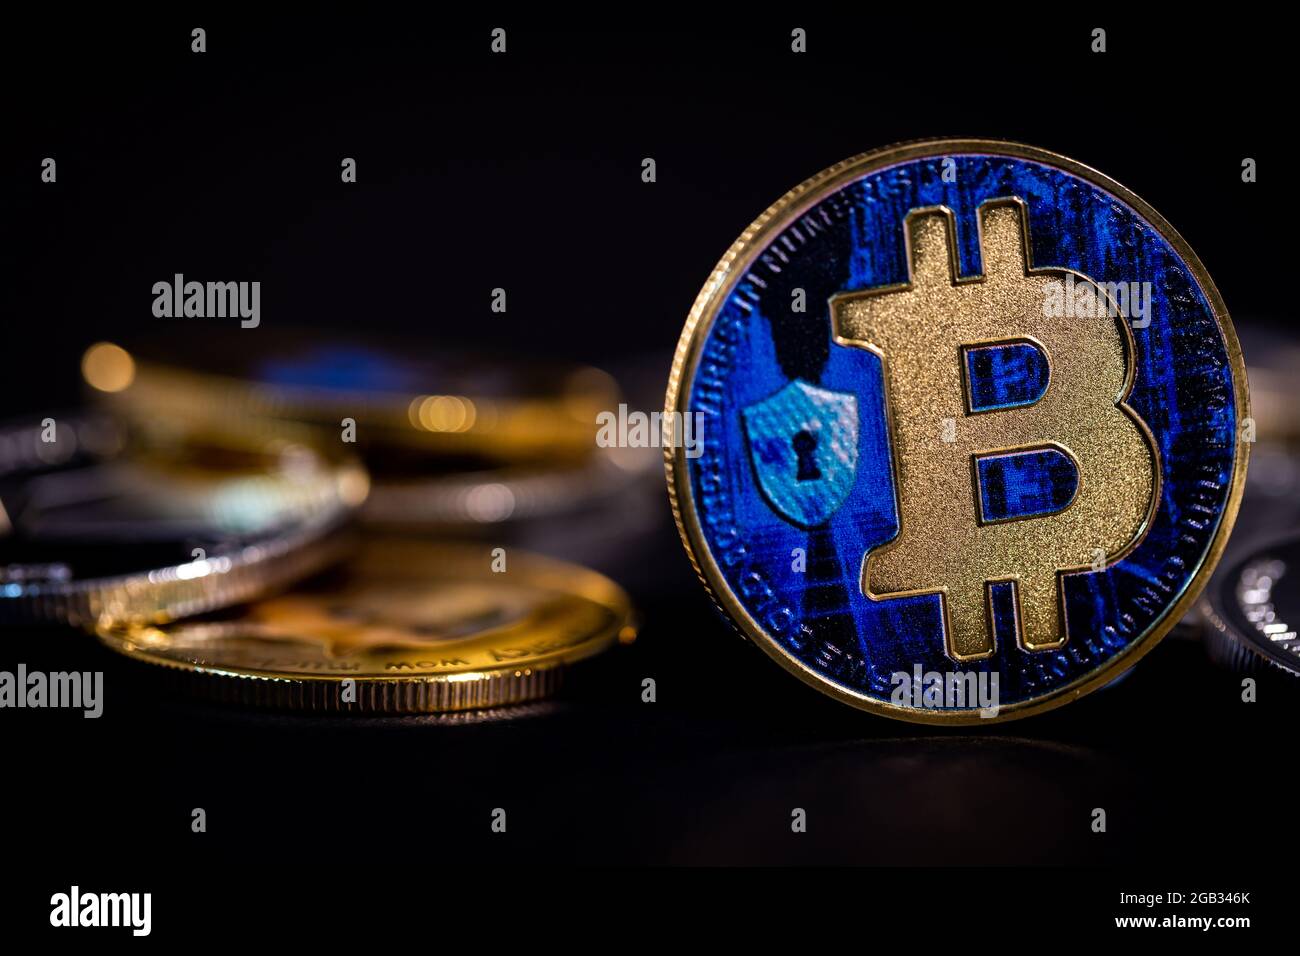 Bitcoin tokens amongst other cryptocurrency coins Stock Photo